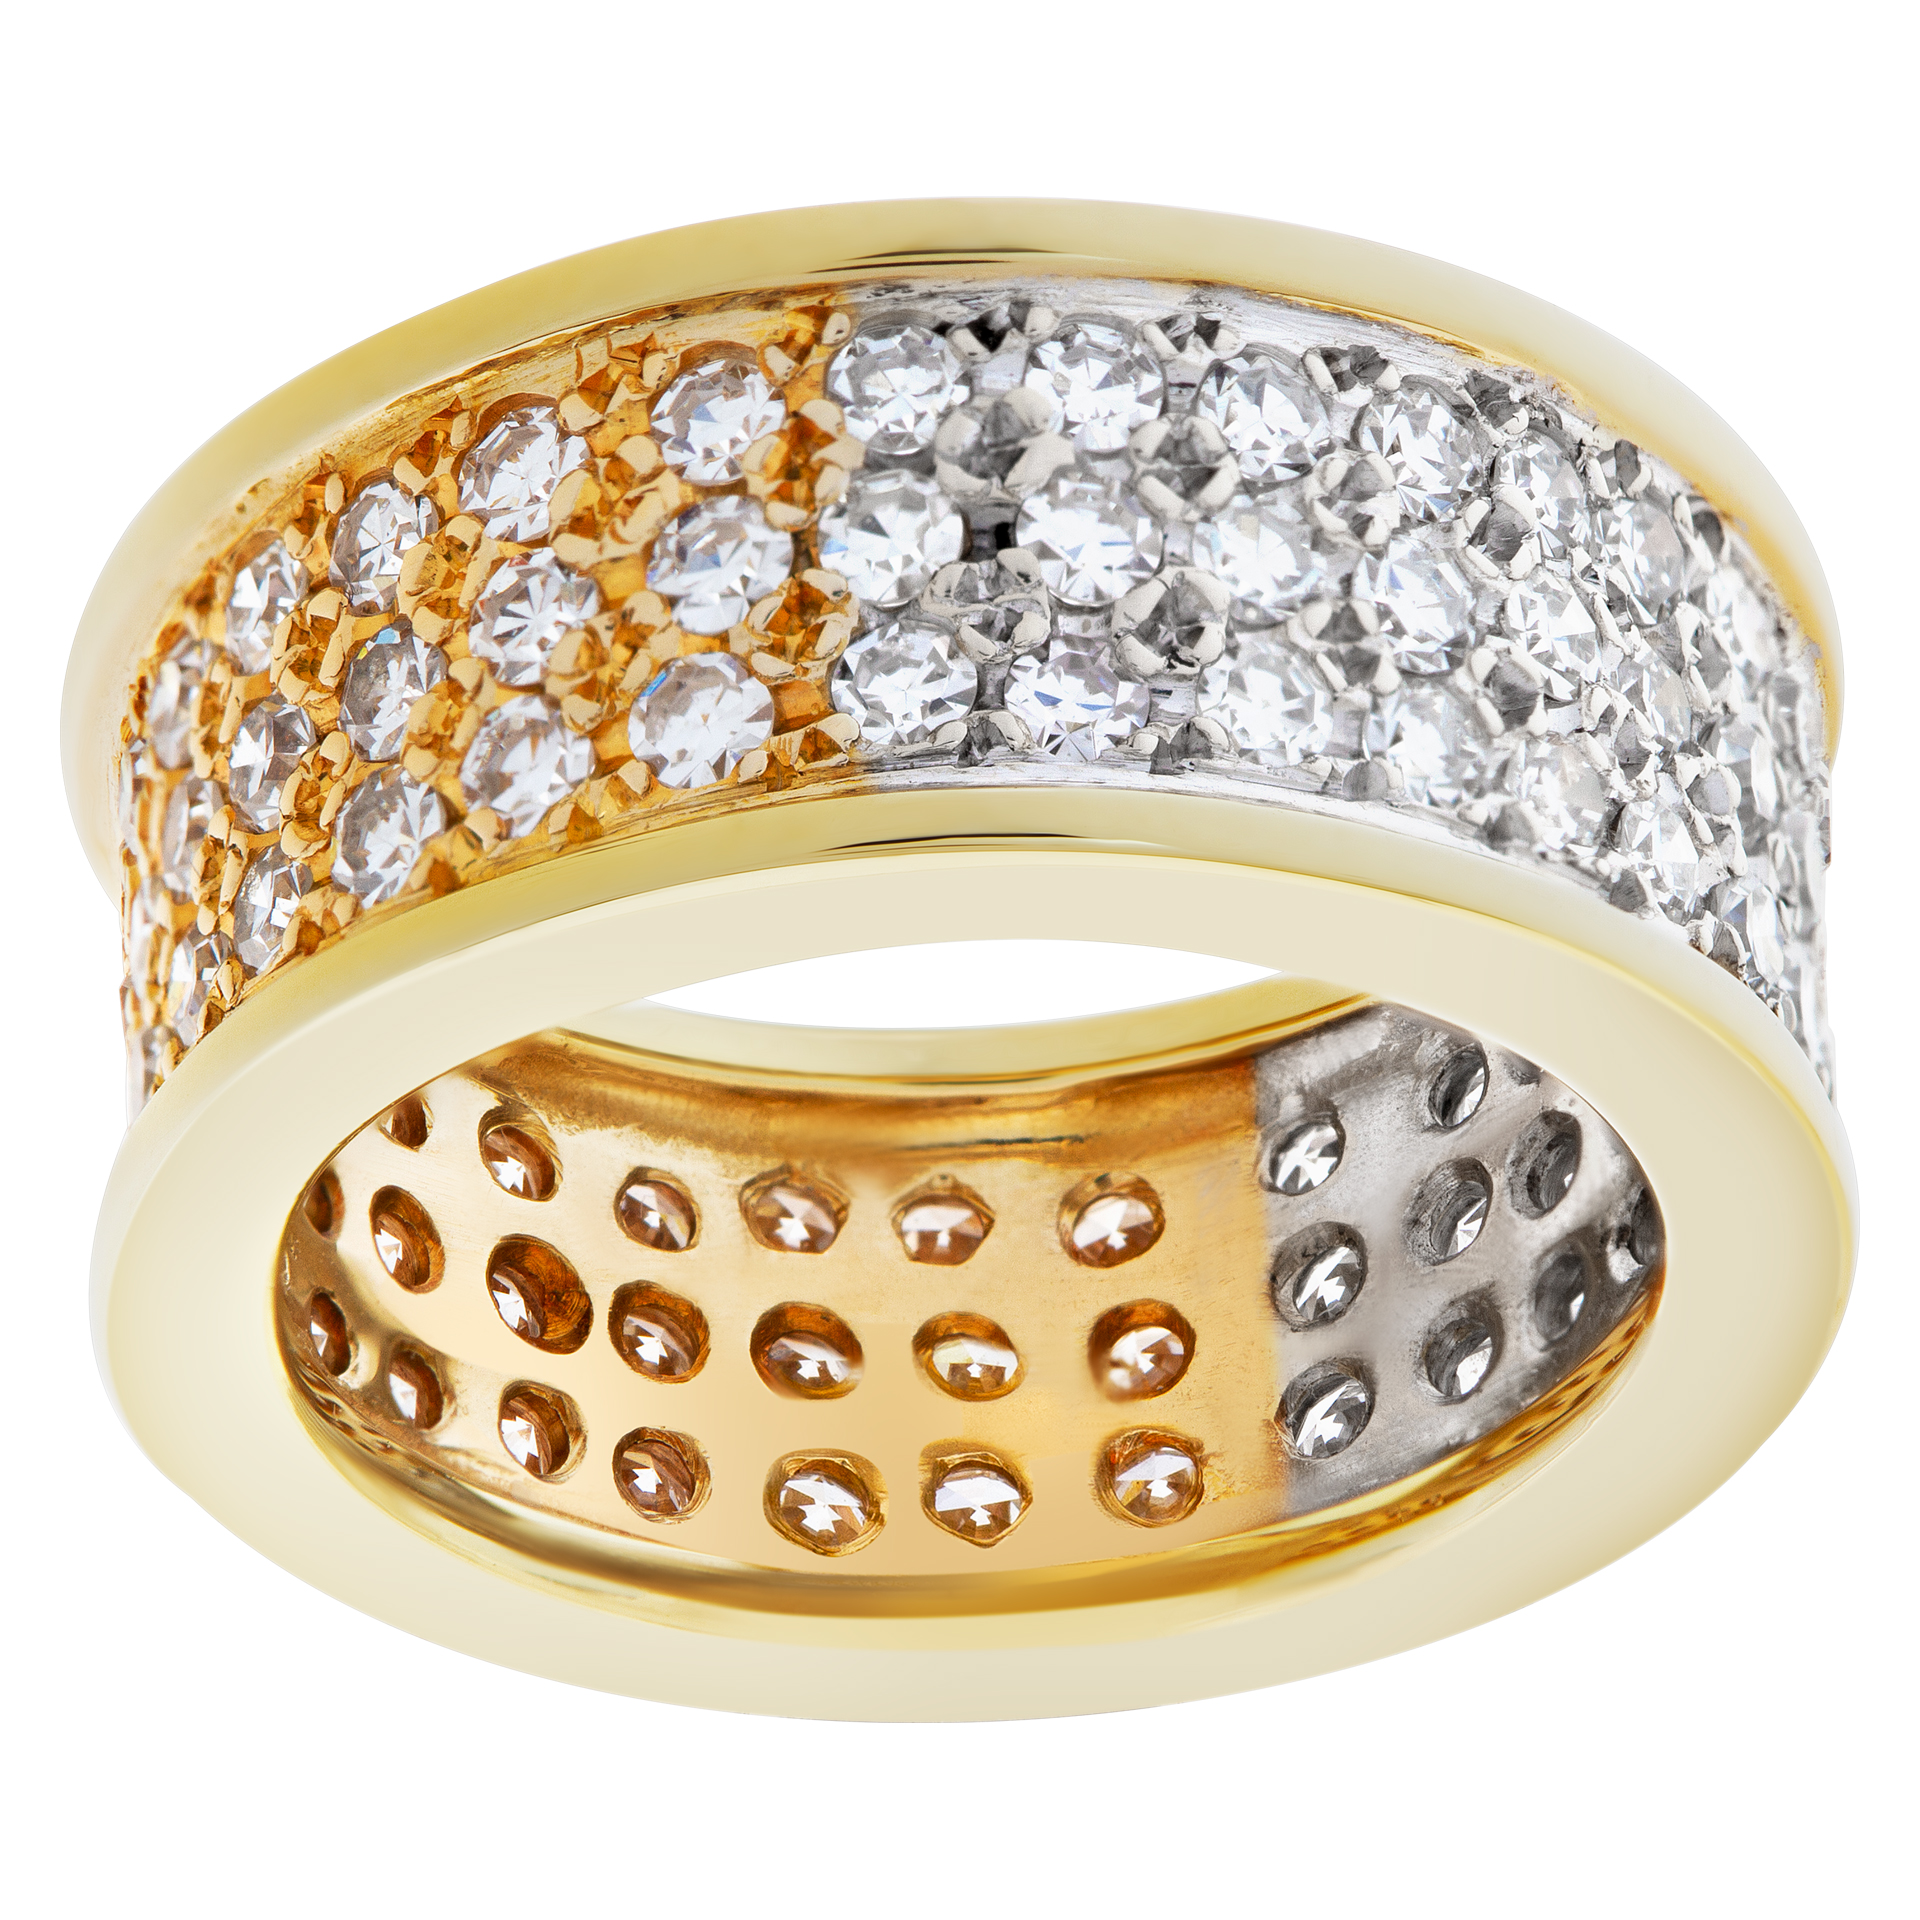 Wide Pave Diamond Band In 18k white and yellow gold